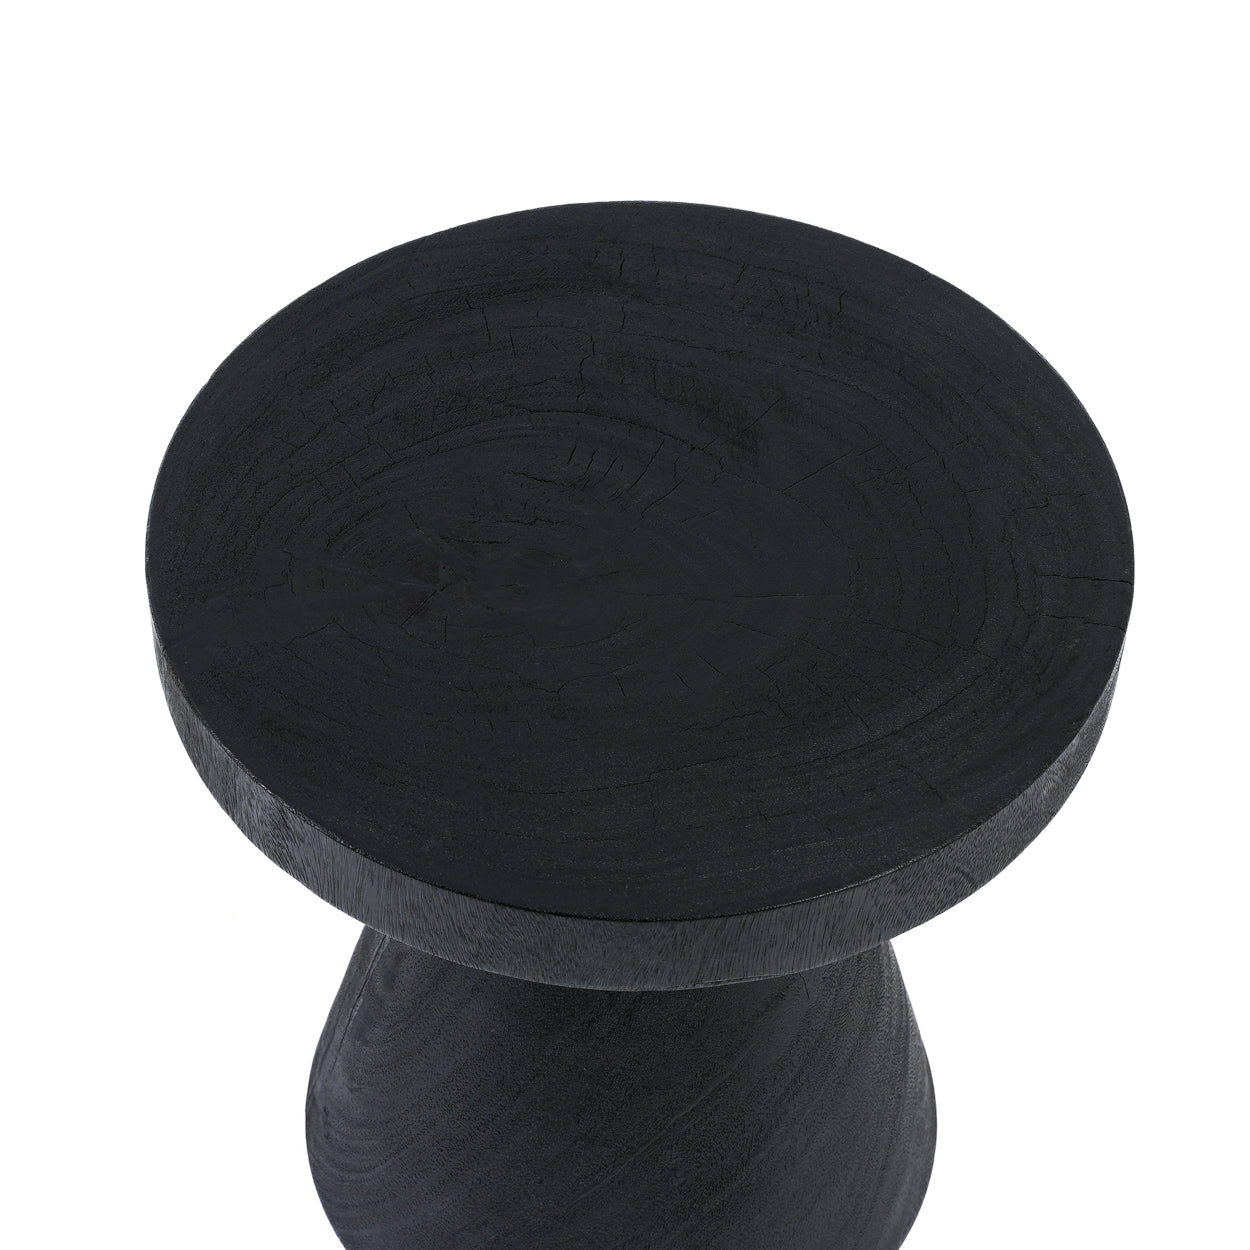 The GRAVITY Side Table - Black View Above